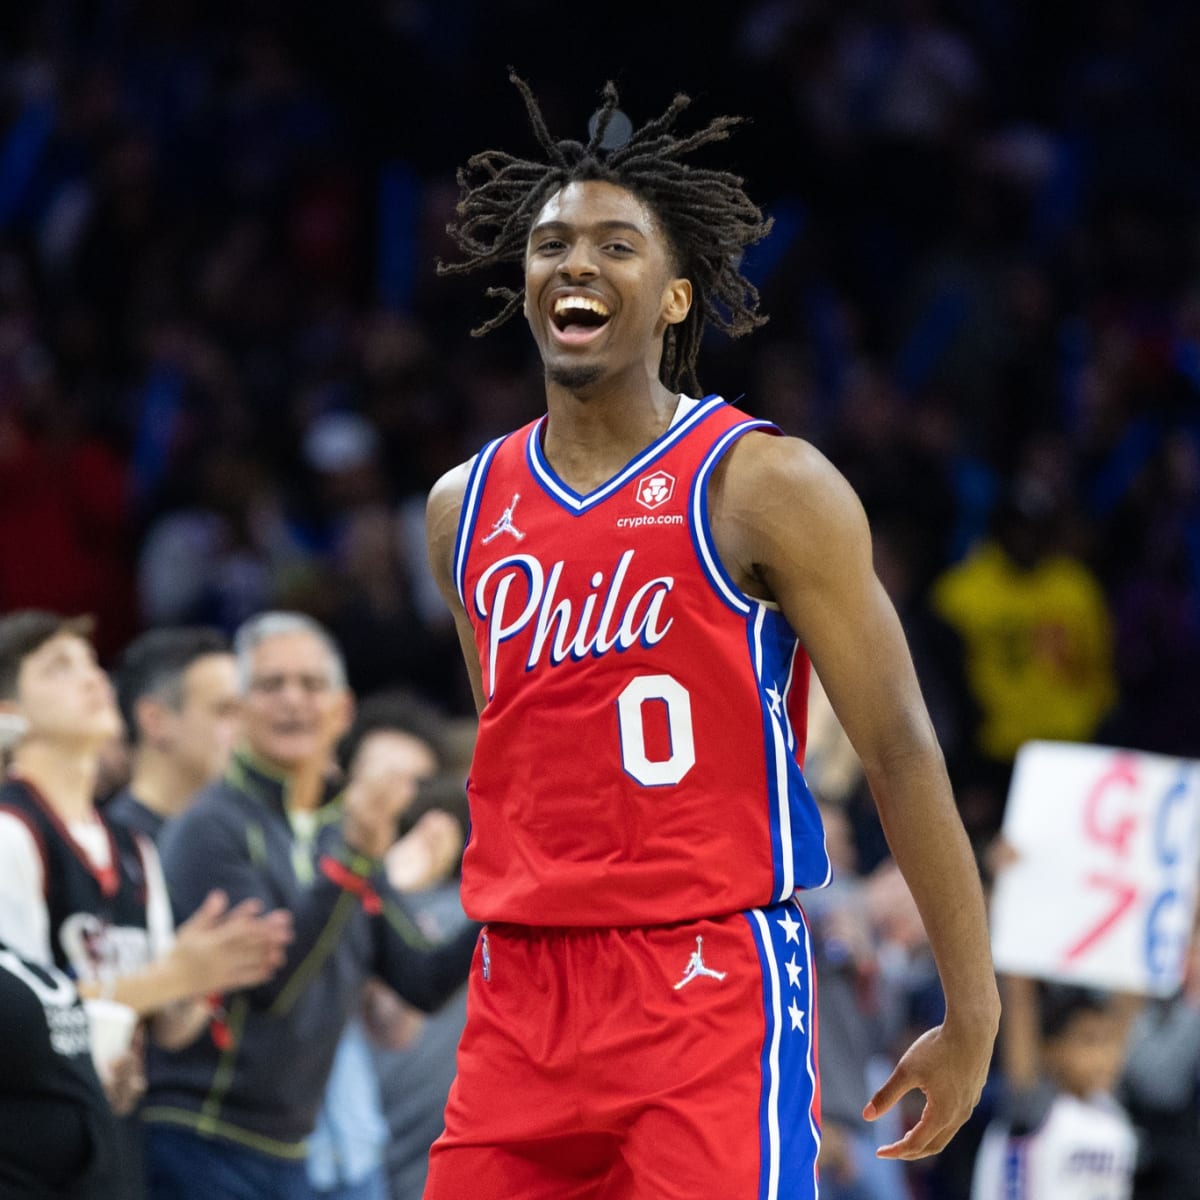 Sixers News: Tyrese Maxey explodes for career-high 39 points vs